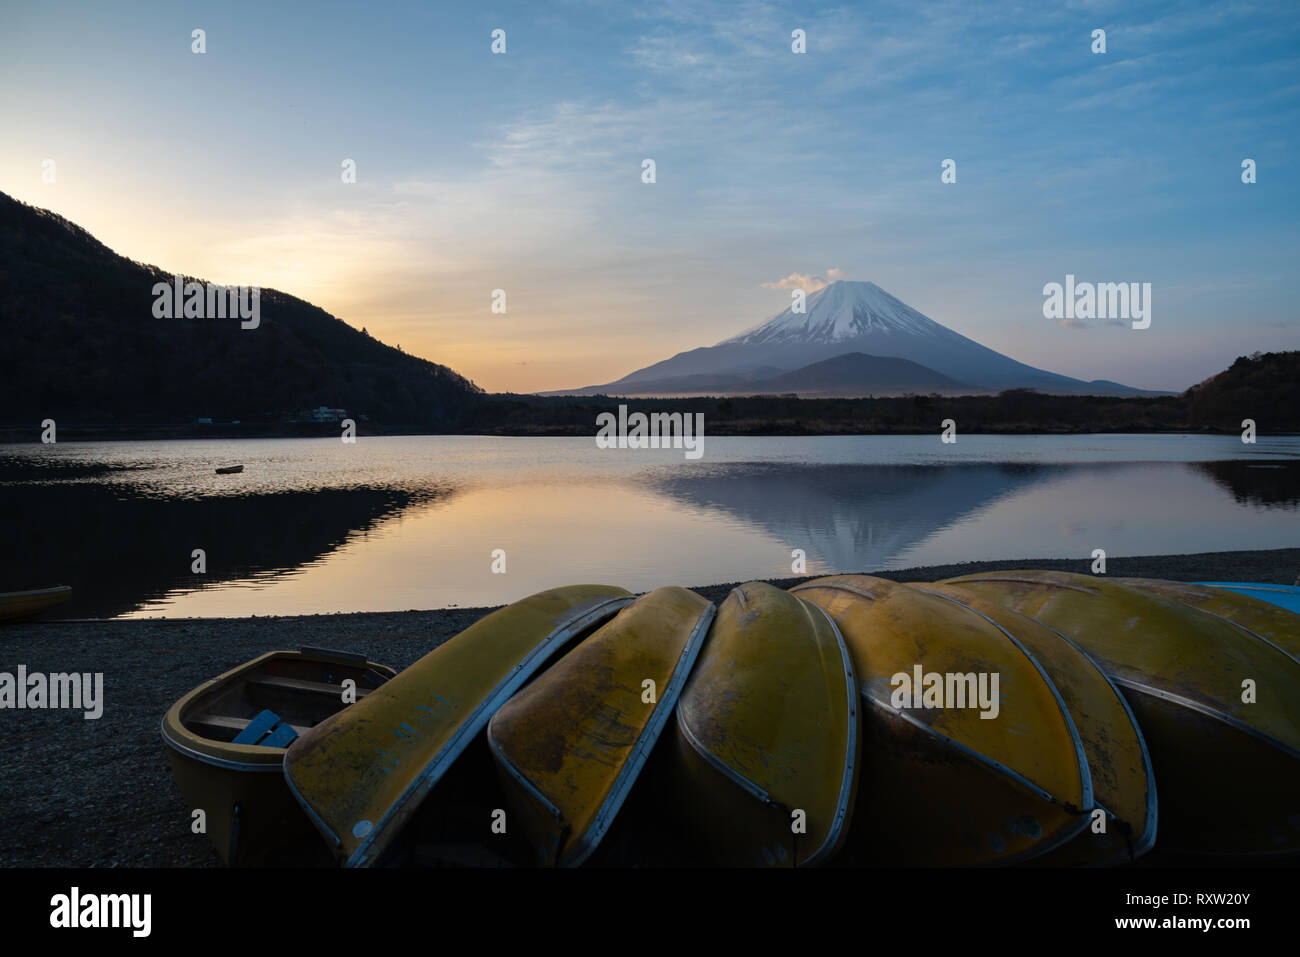 Mount Fuji ( Mt. Fuji ) in the morning day with reflection on sunrise time Stock Photo